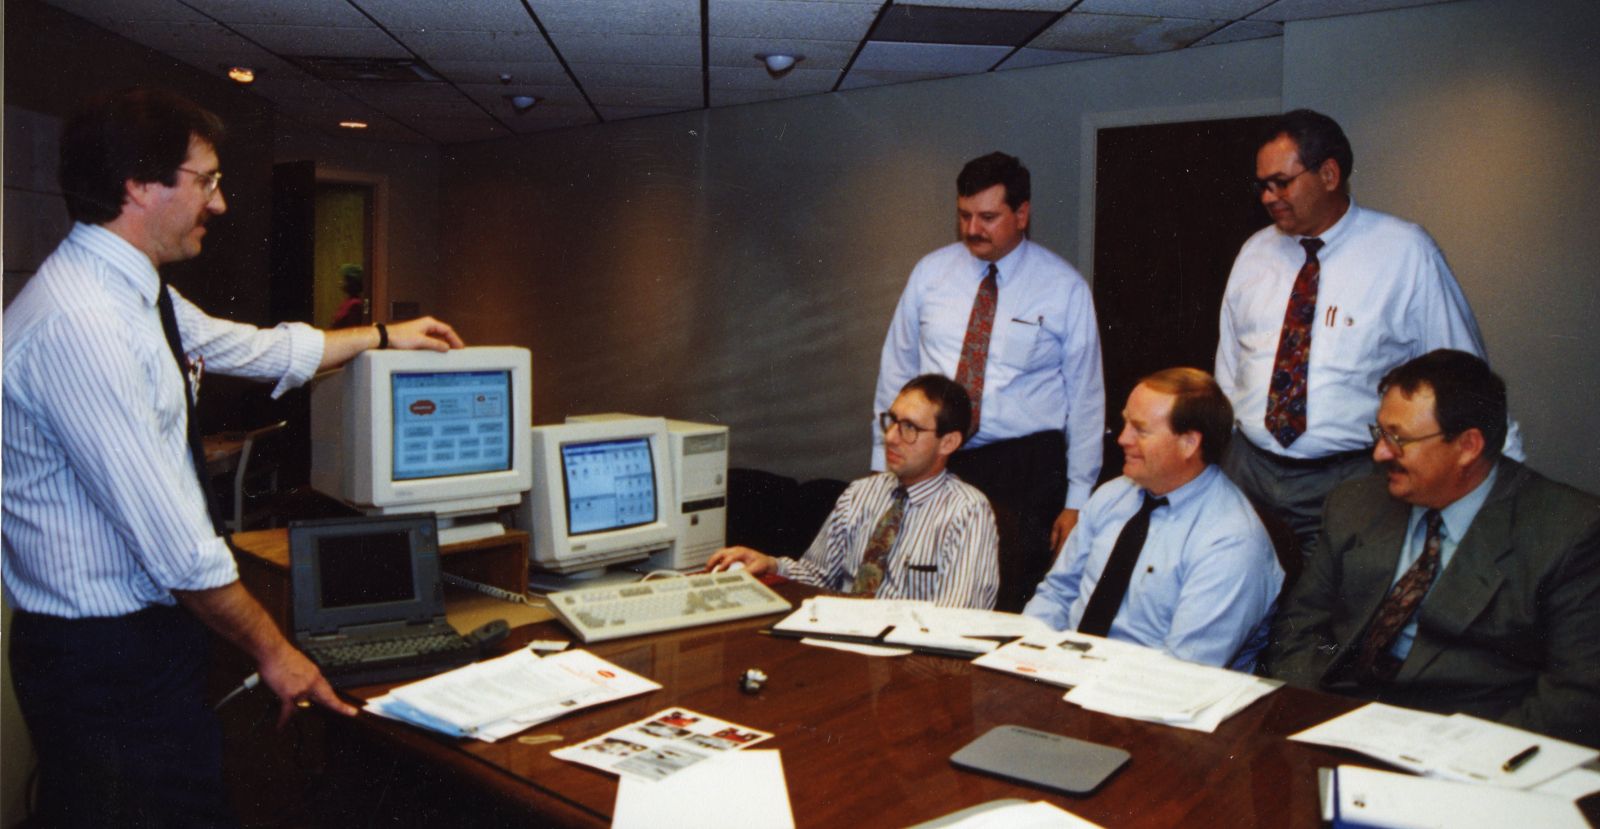 An archival photo from the sales meeting in 1994 showing six men learning about computer software.